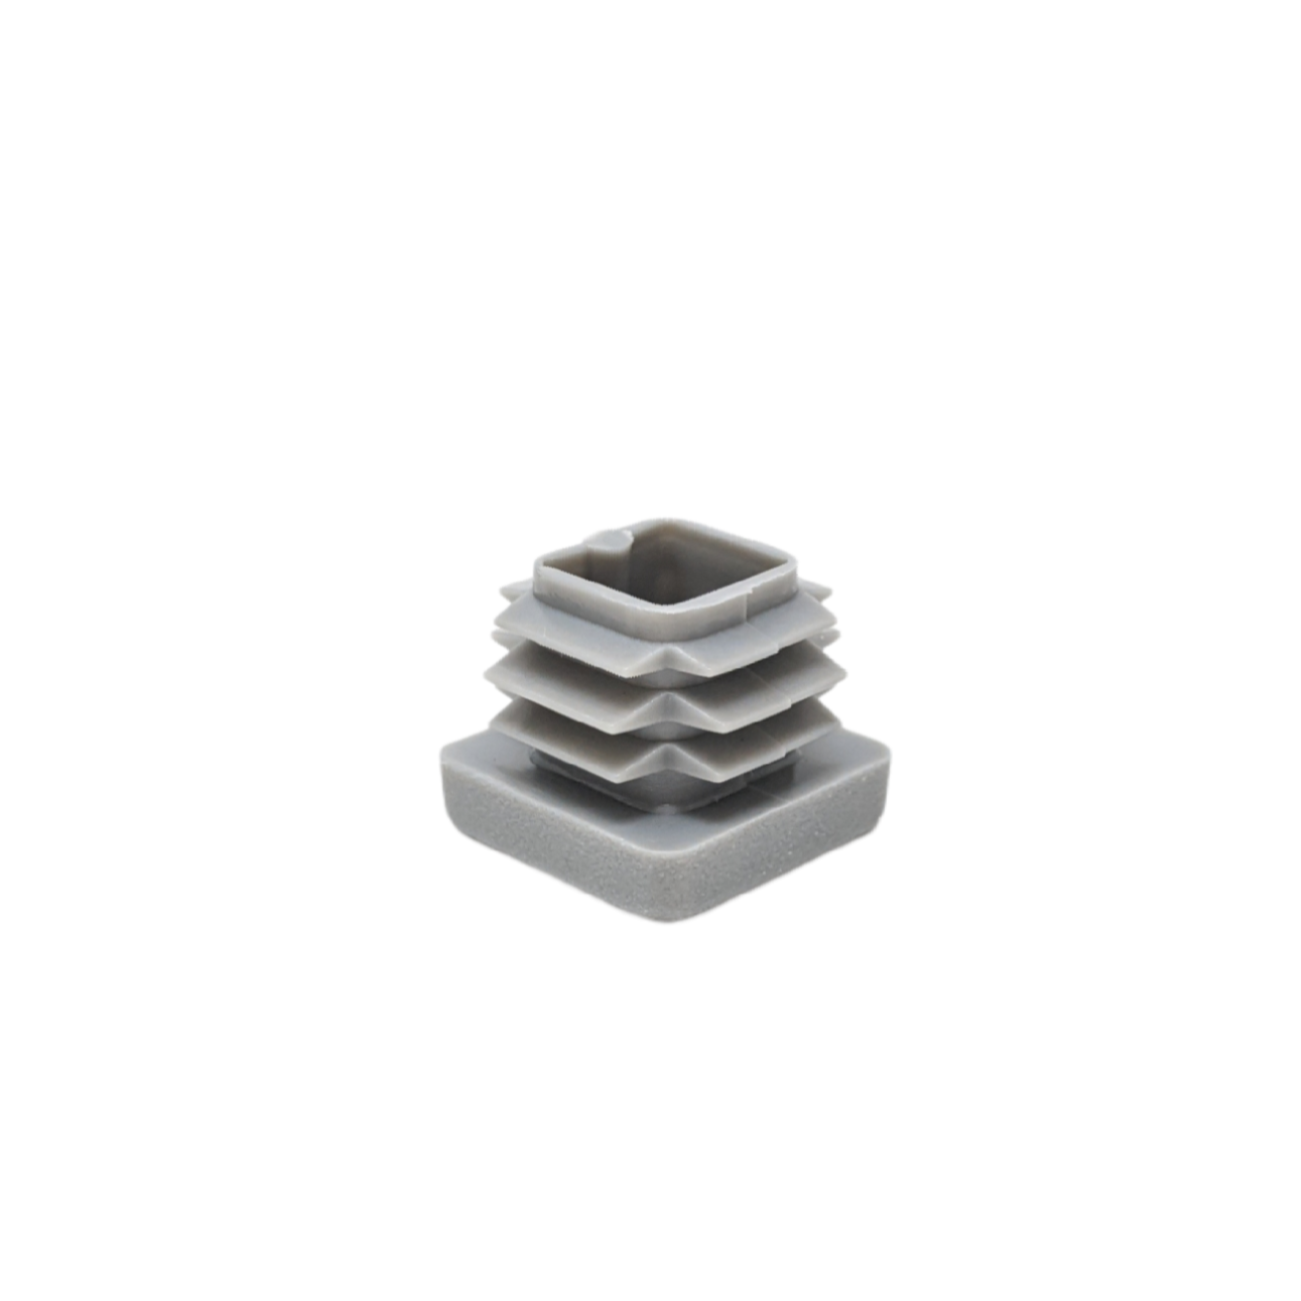 Square Tube Inserts 20mm x 20mm Grey | Made in Germany | Keay Vital Parts - Keay Vital Parts